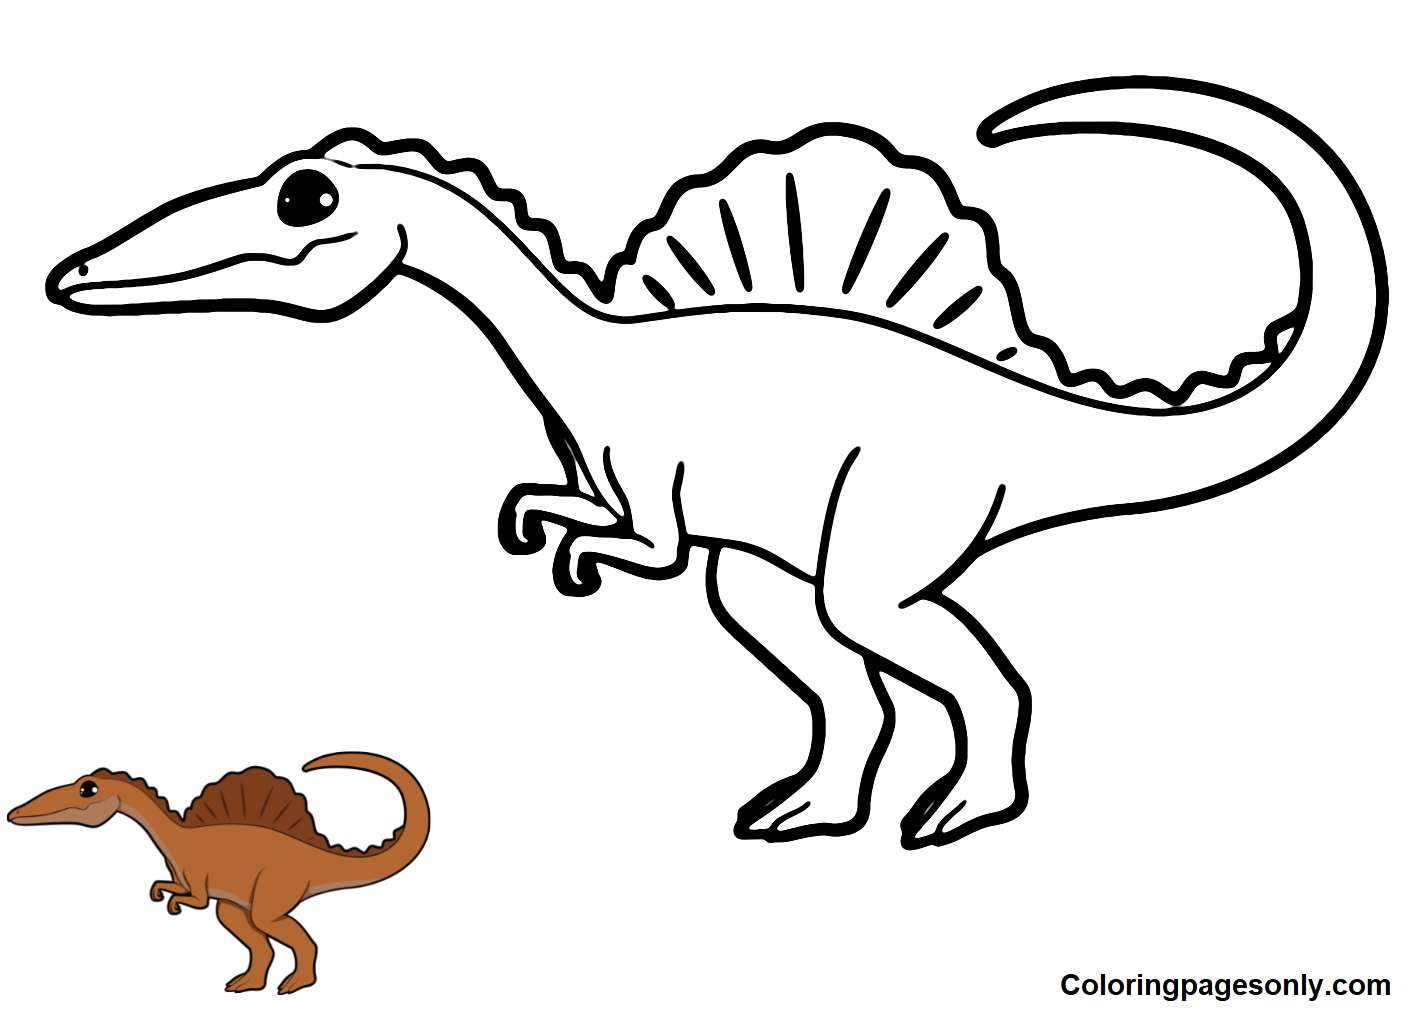 Spinosaurus Image Coloring Pages